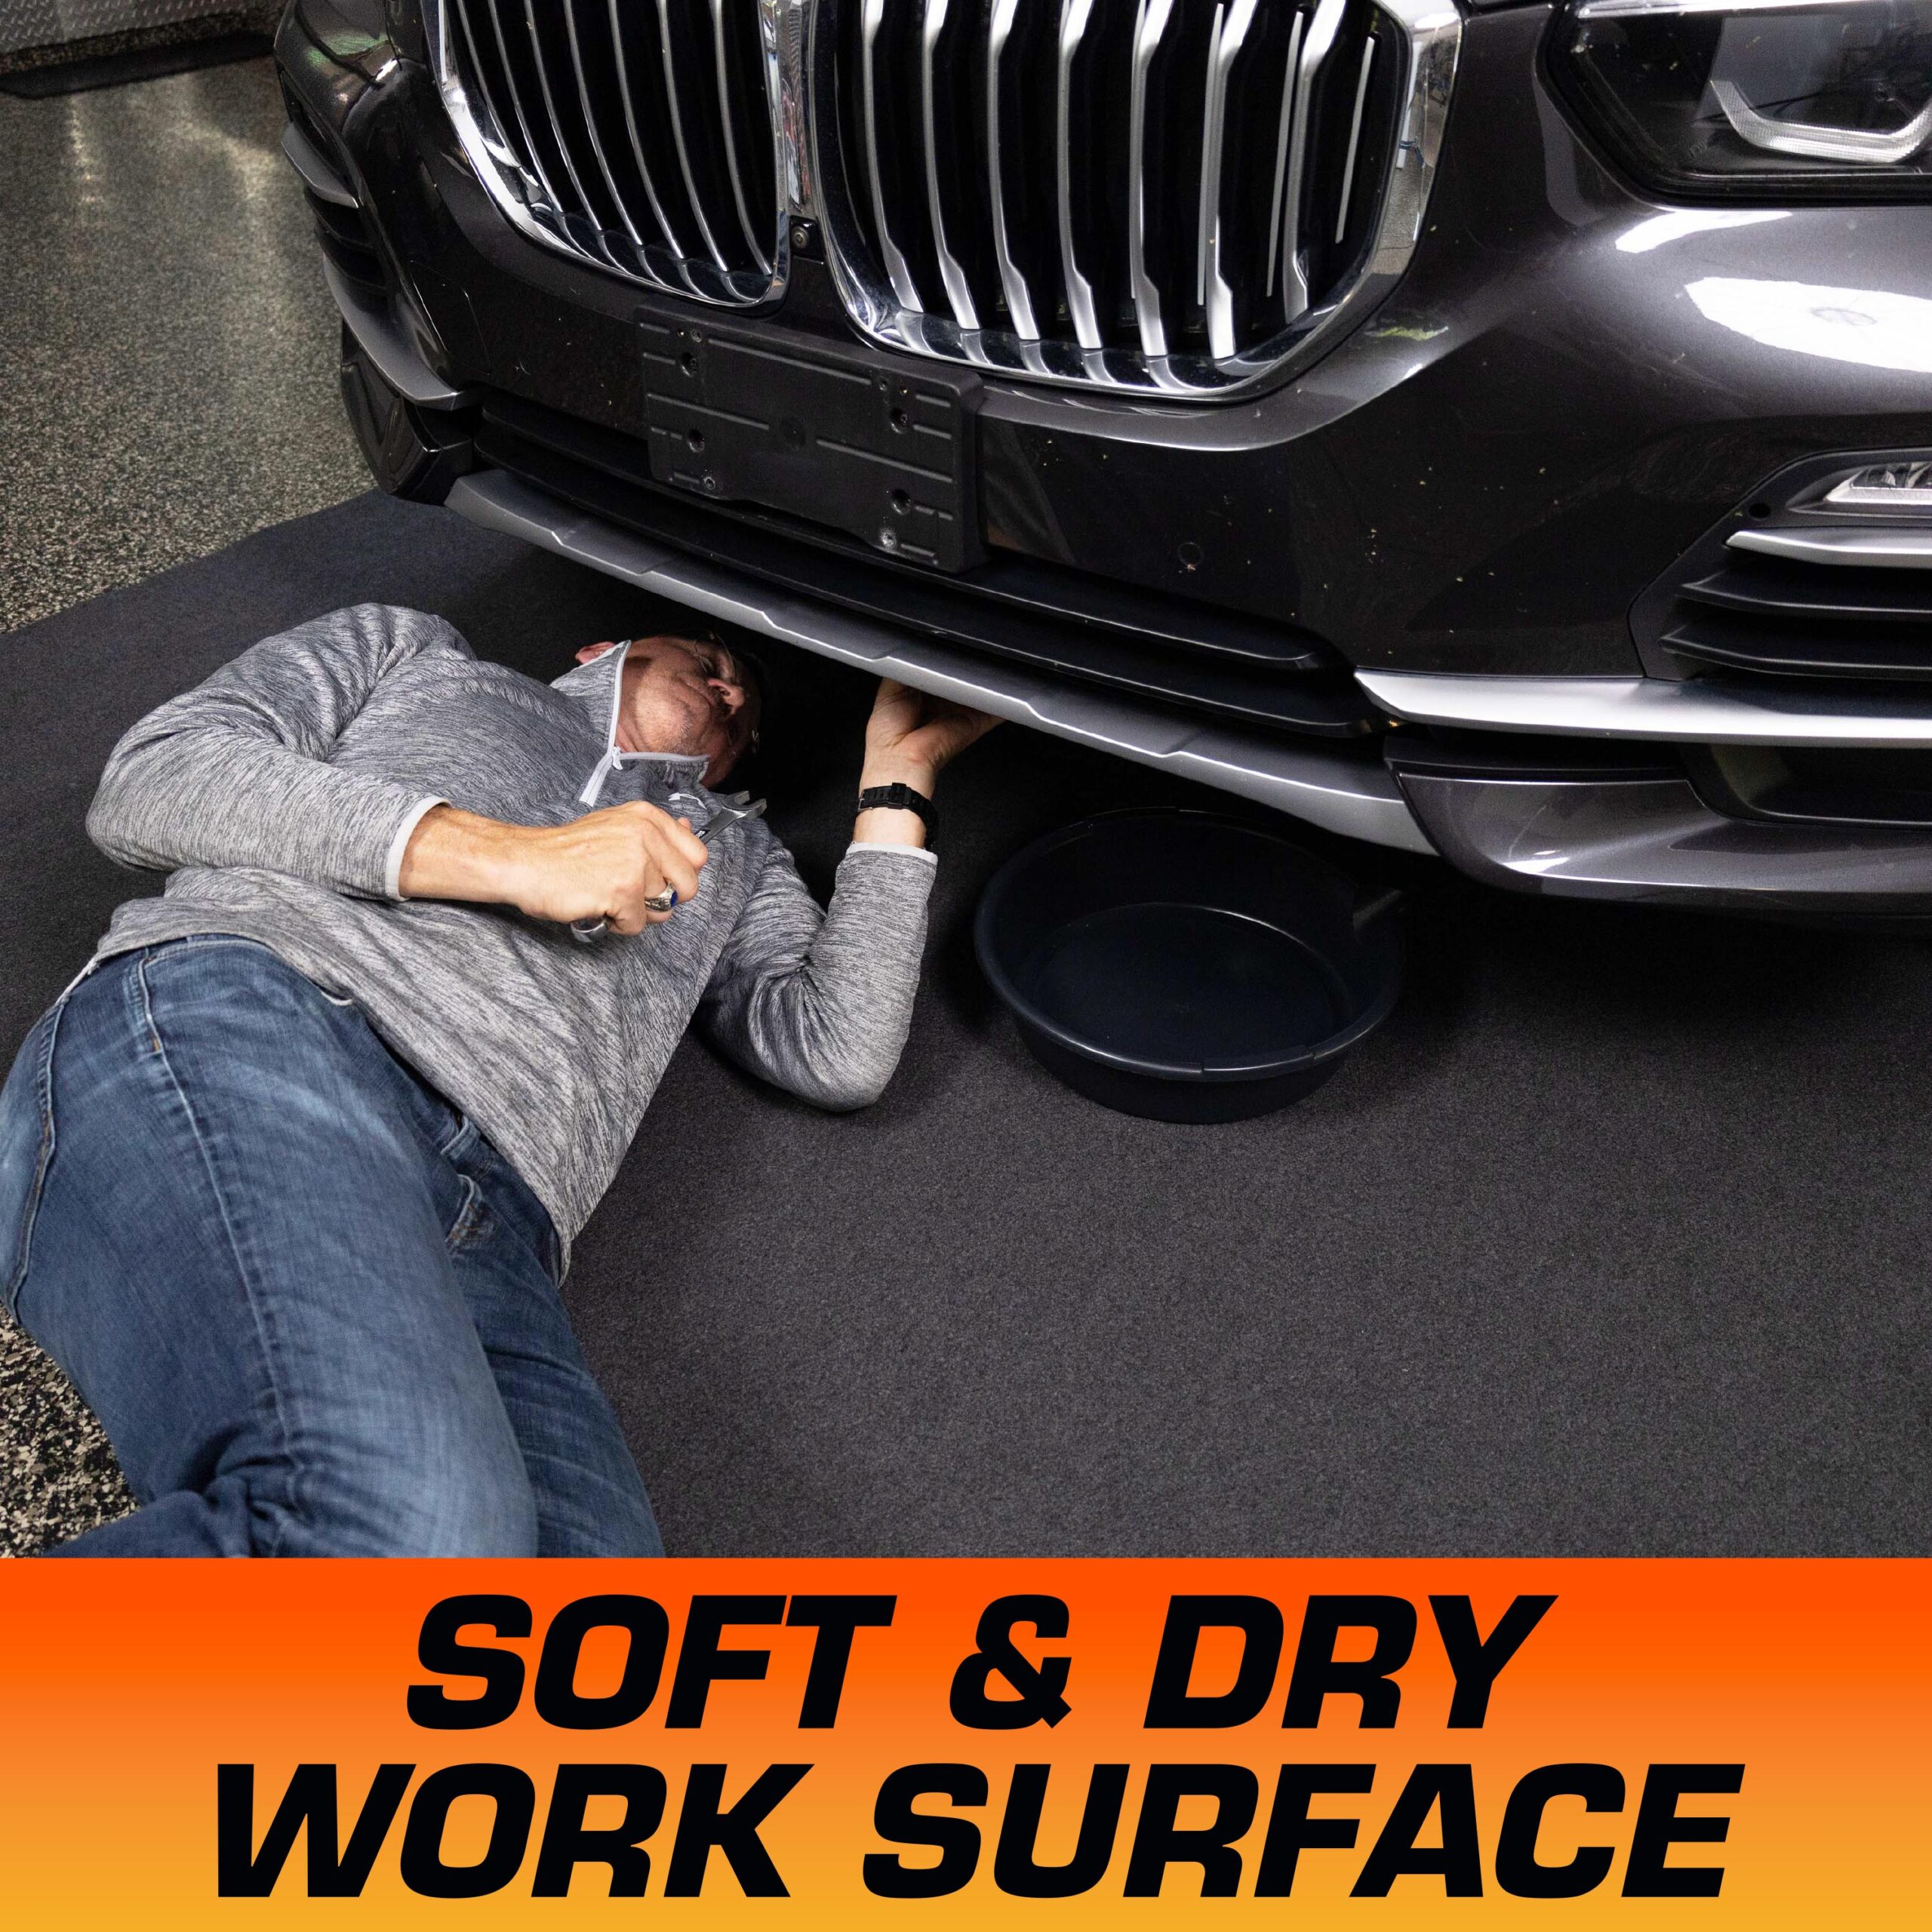 https://drymate.com/wp-content/uploads/2020/01/4-Armor-All-Oil-Spill-Mat-absrobent-drip-floor-surface-garage-protection-pad-waterproof-reusable-durable-maintenance-scaled.jpg